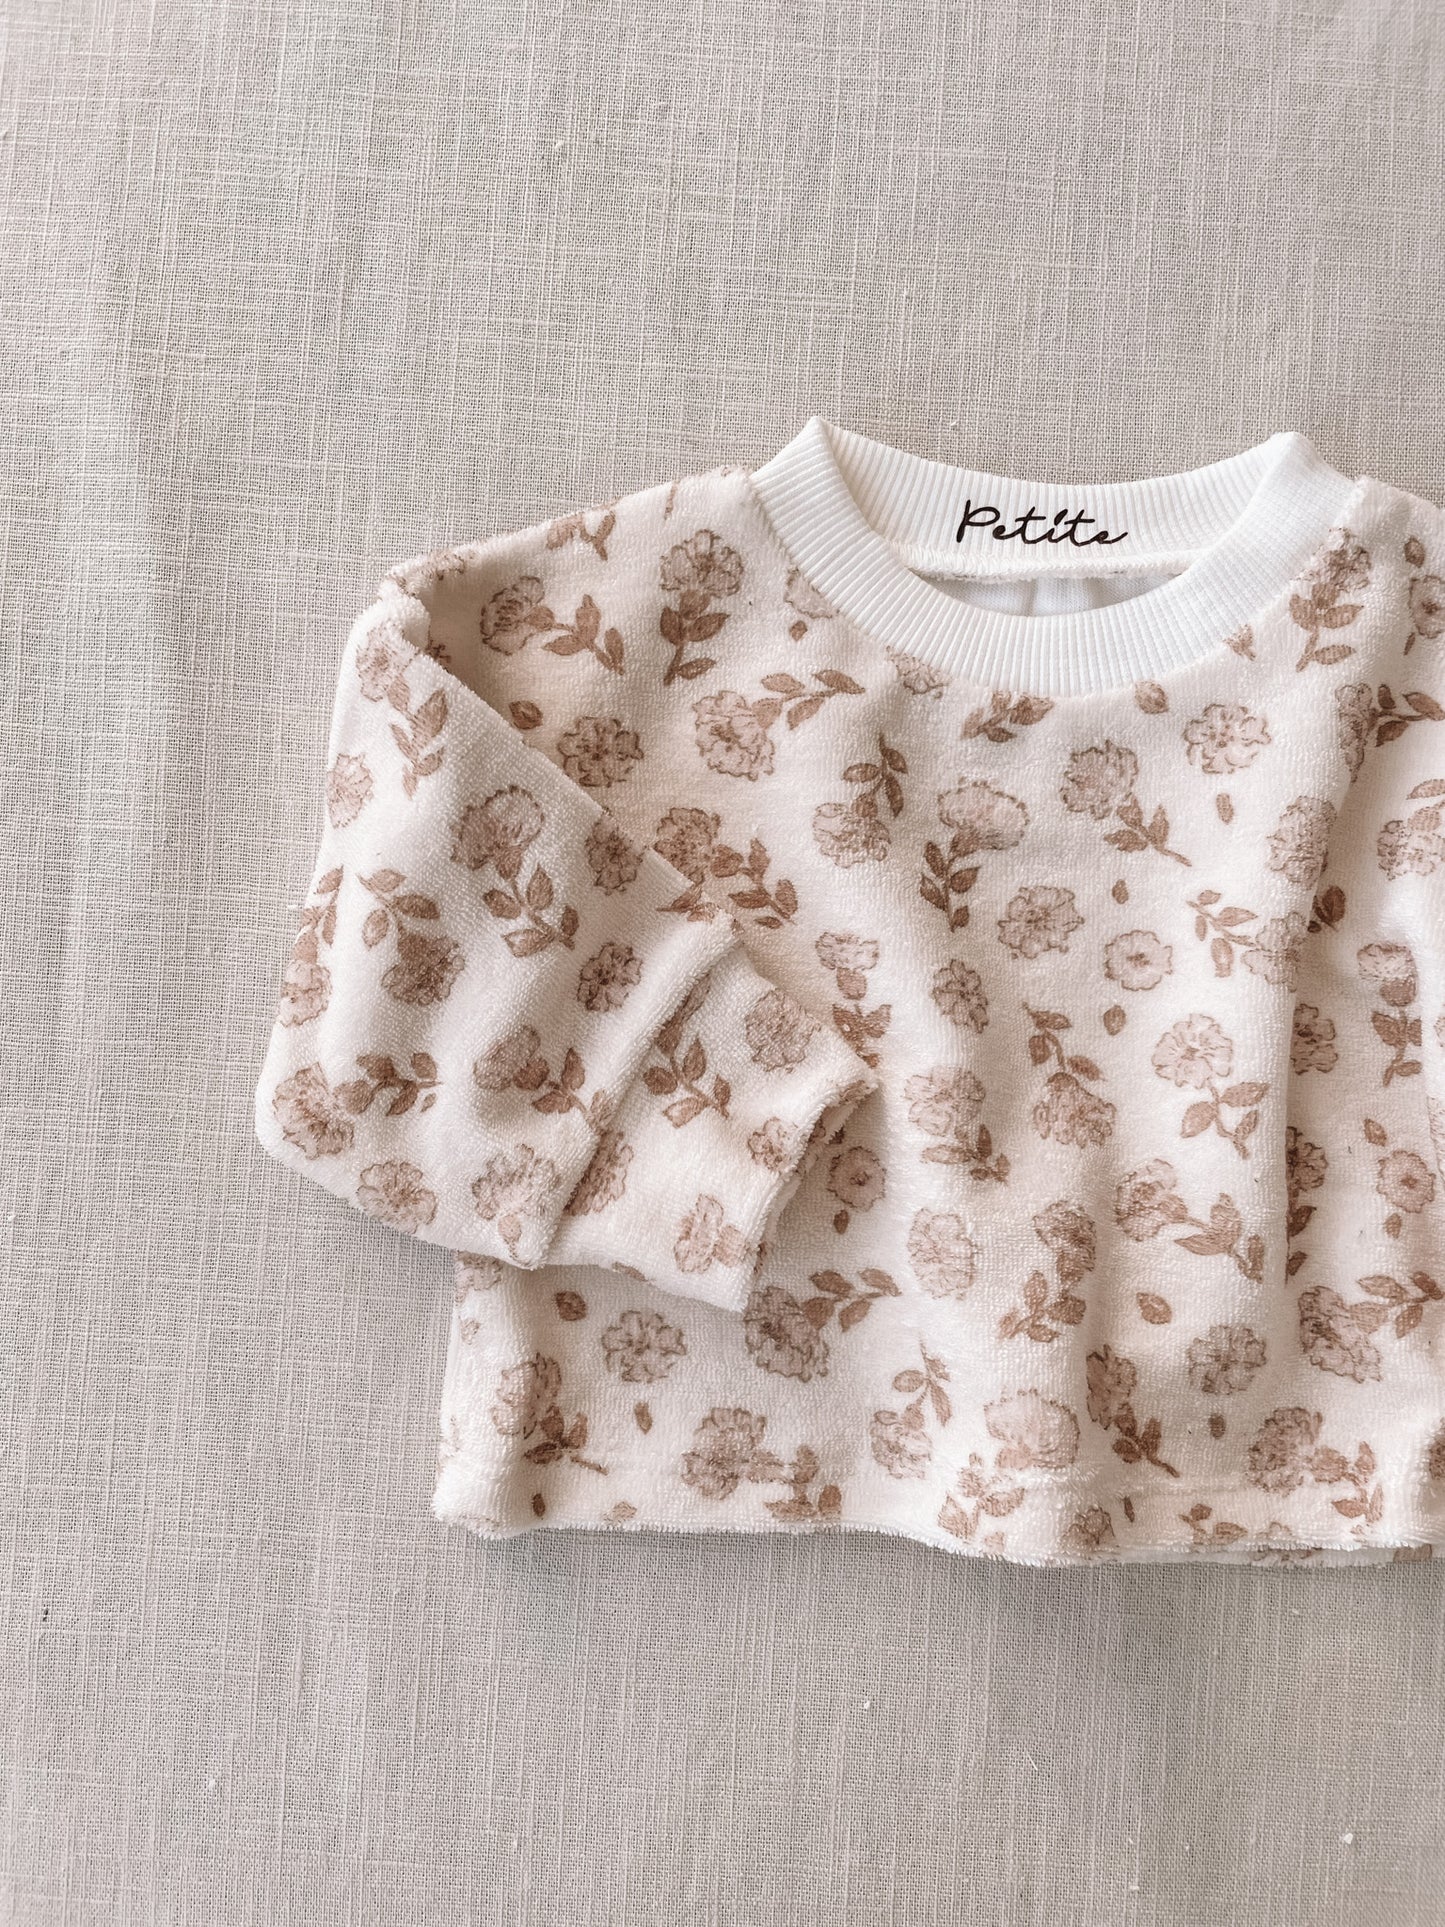 Terry sweater / blossom